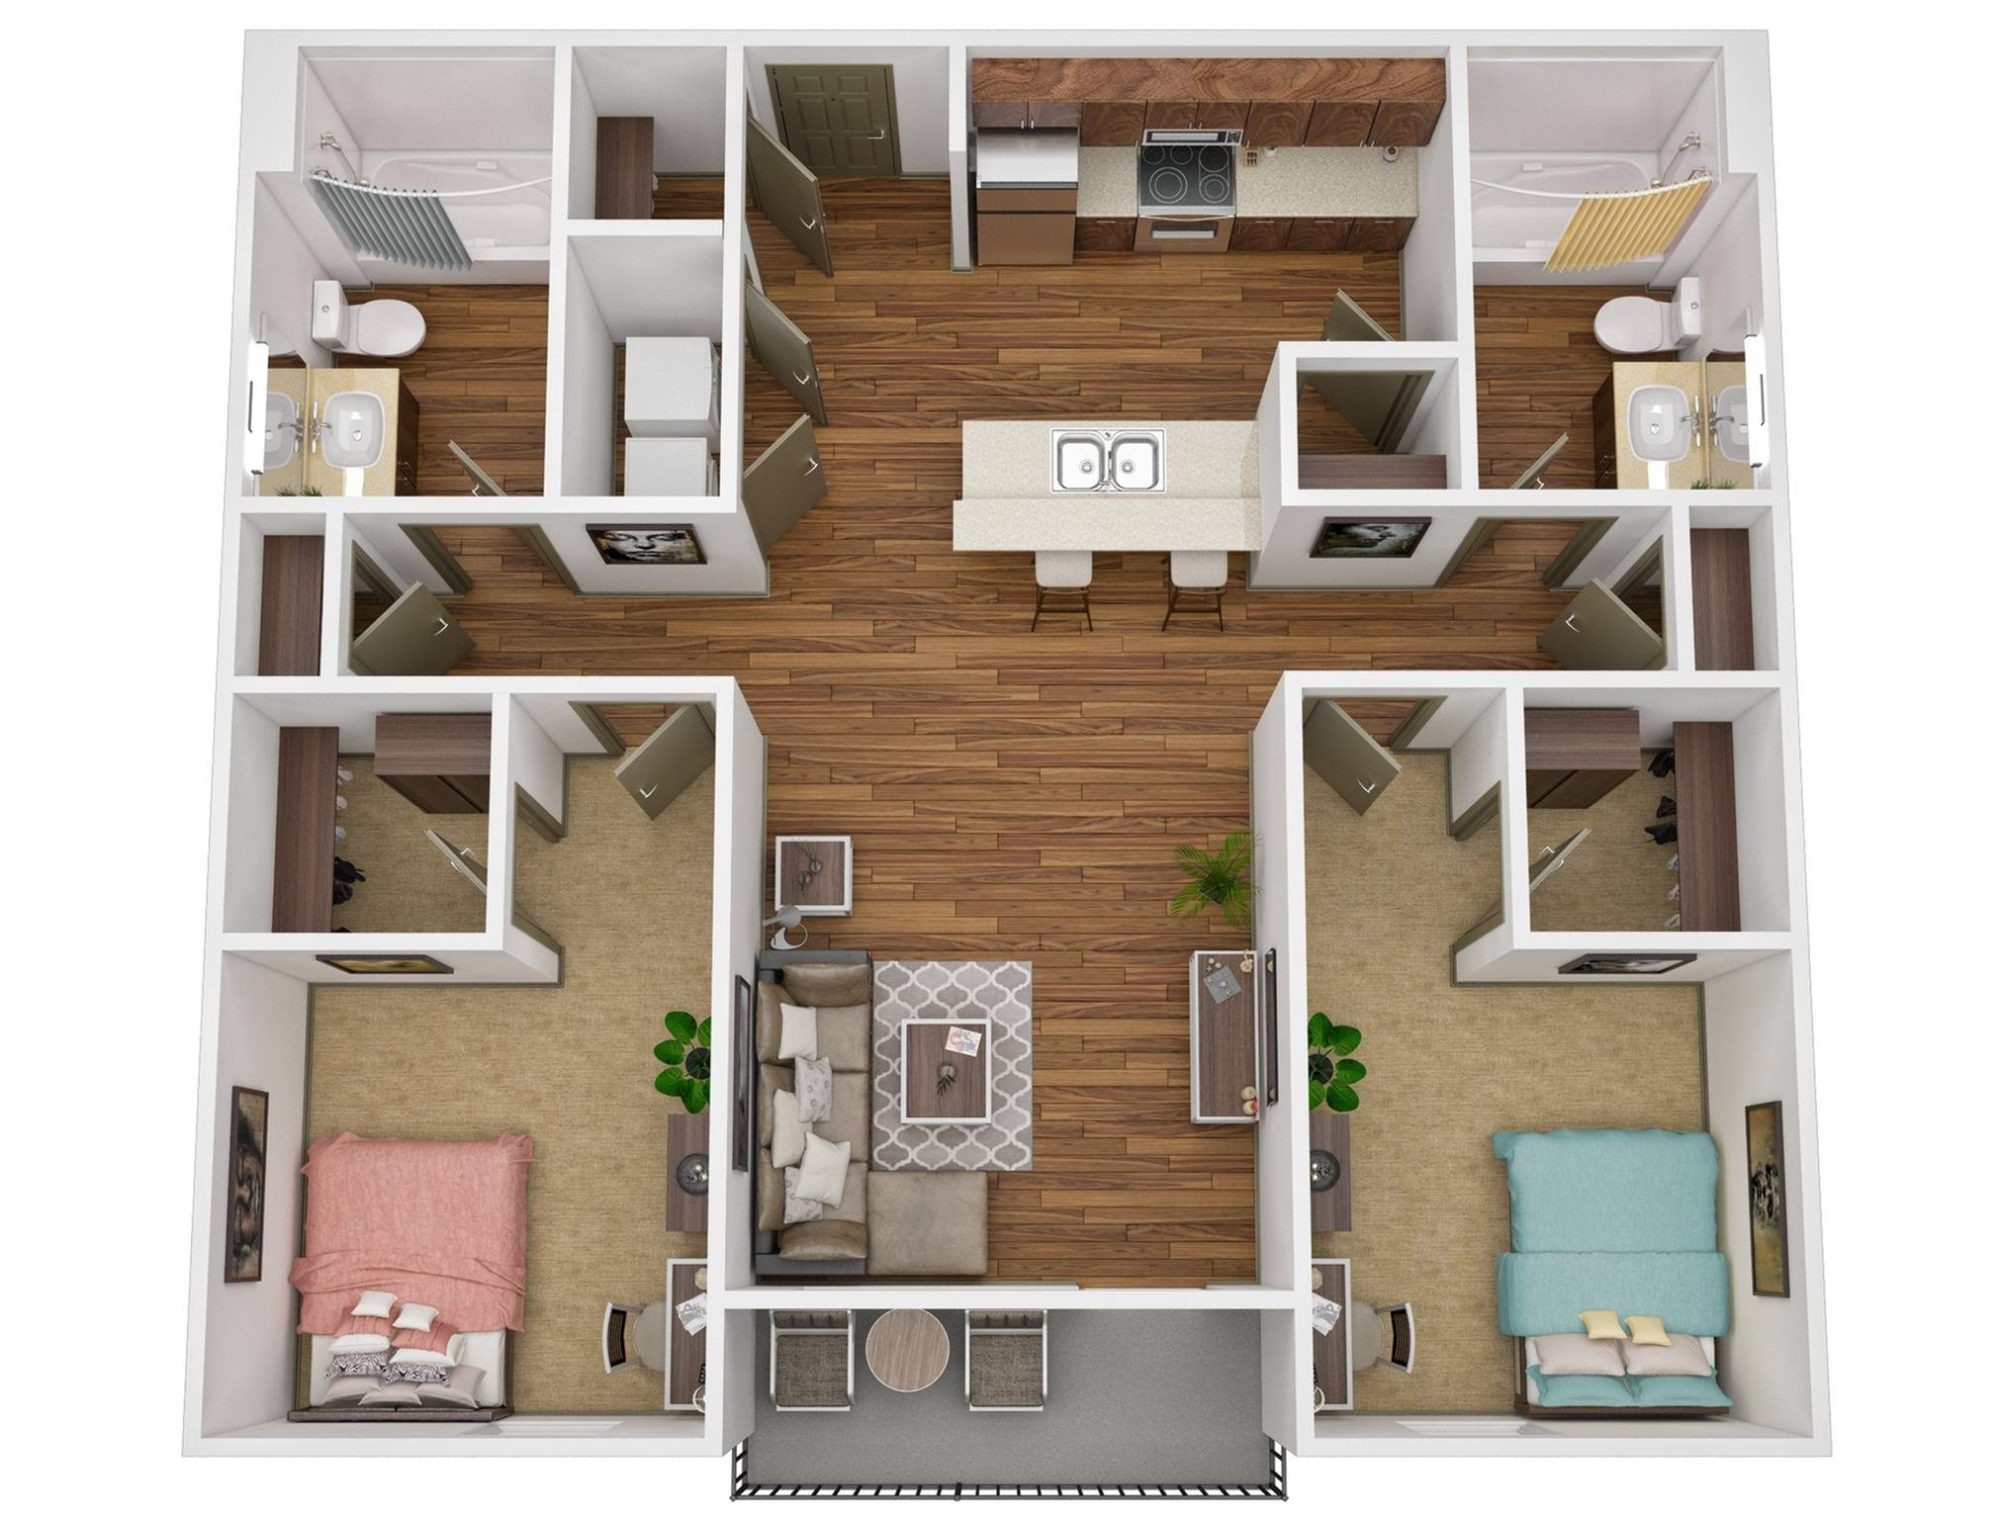 A 3D image of the 2BR/2BA – Platinum Deluxe floorplan, a 974 squarefoot, 2 bed / 2 bath unit